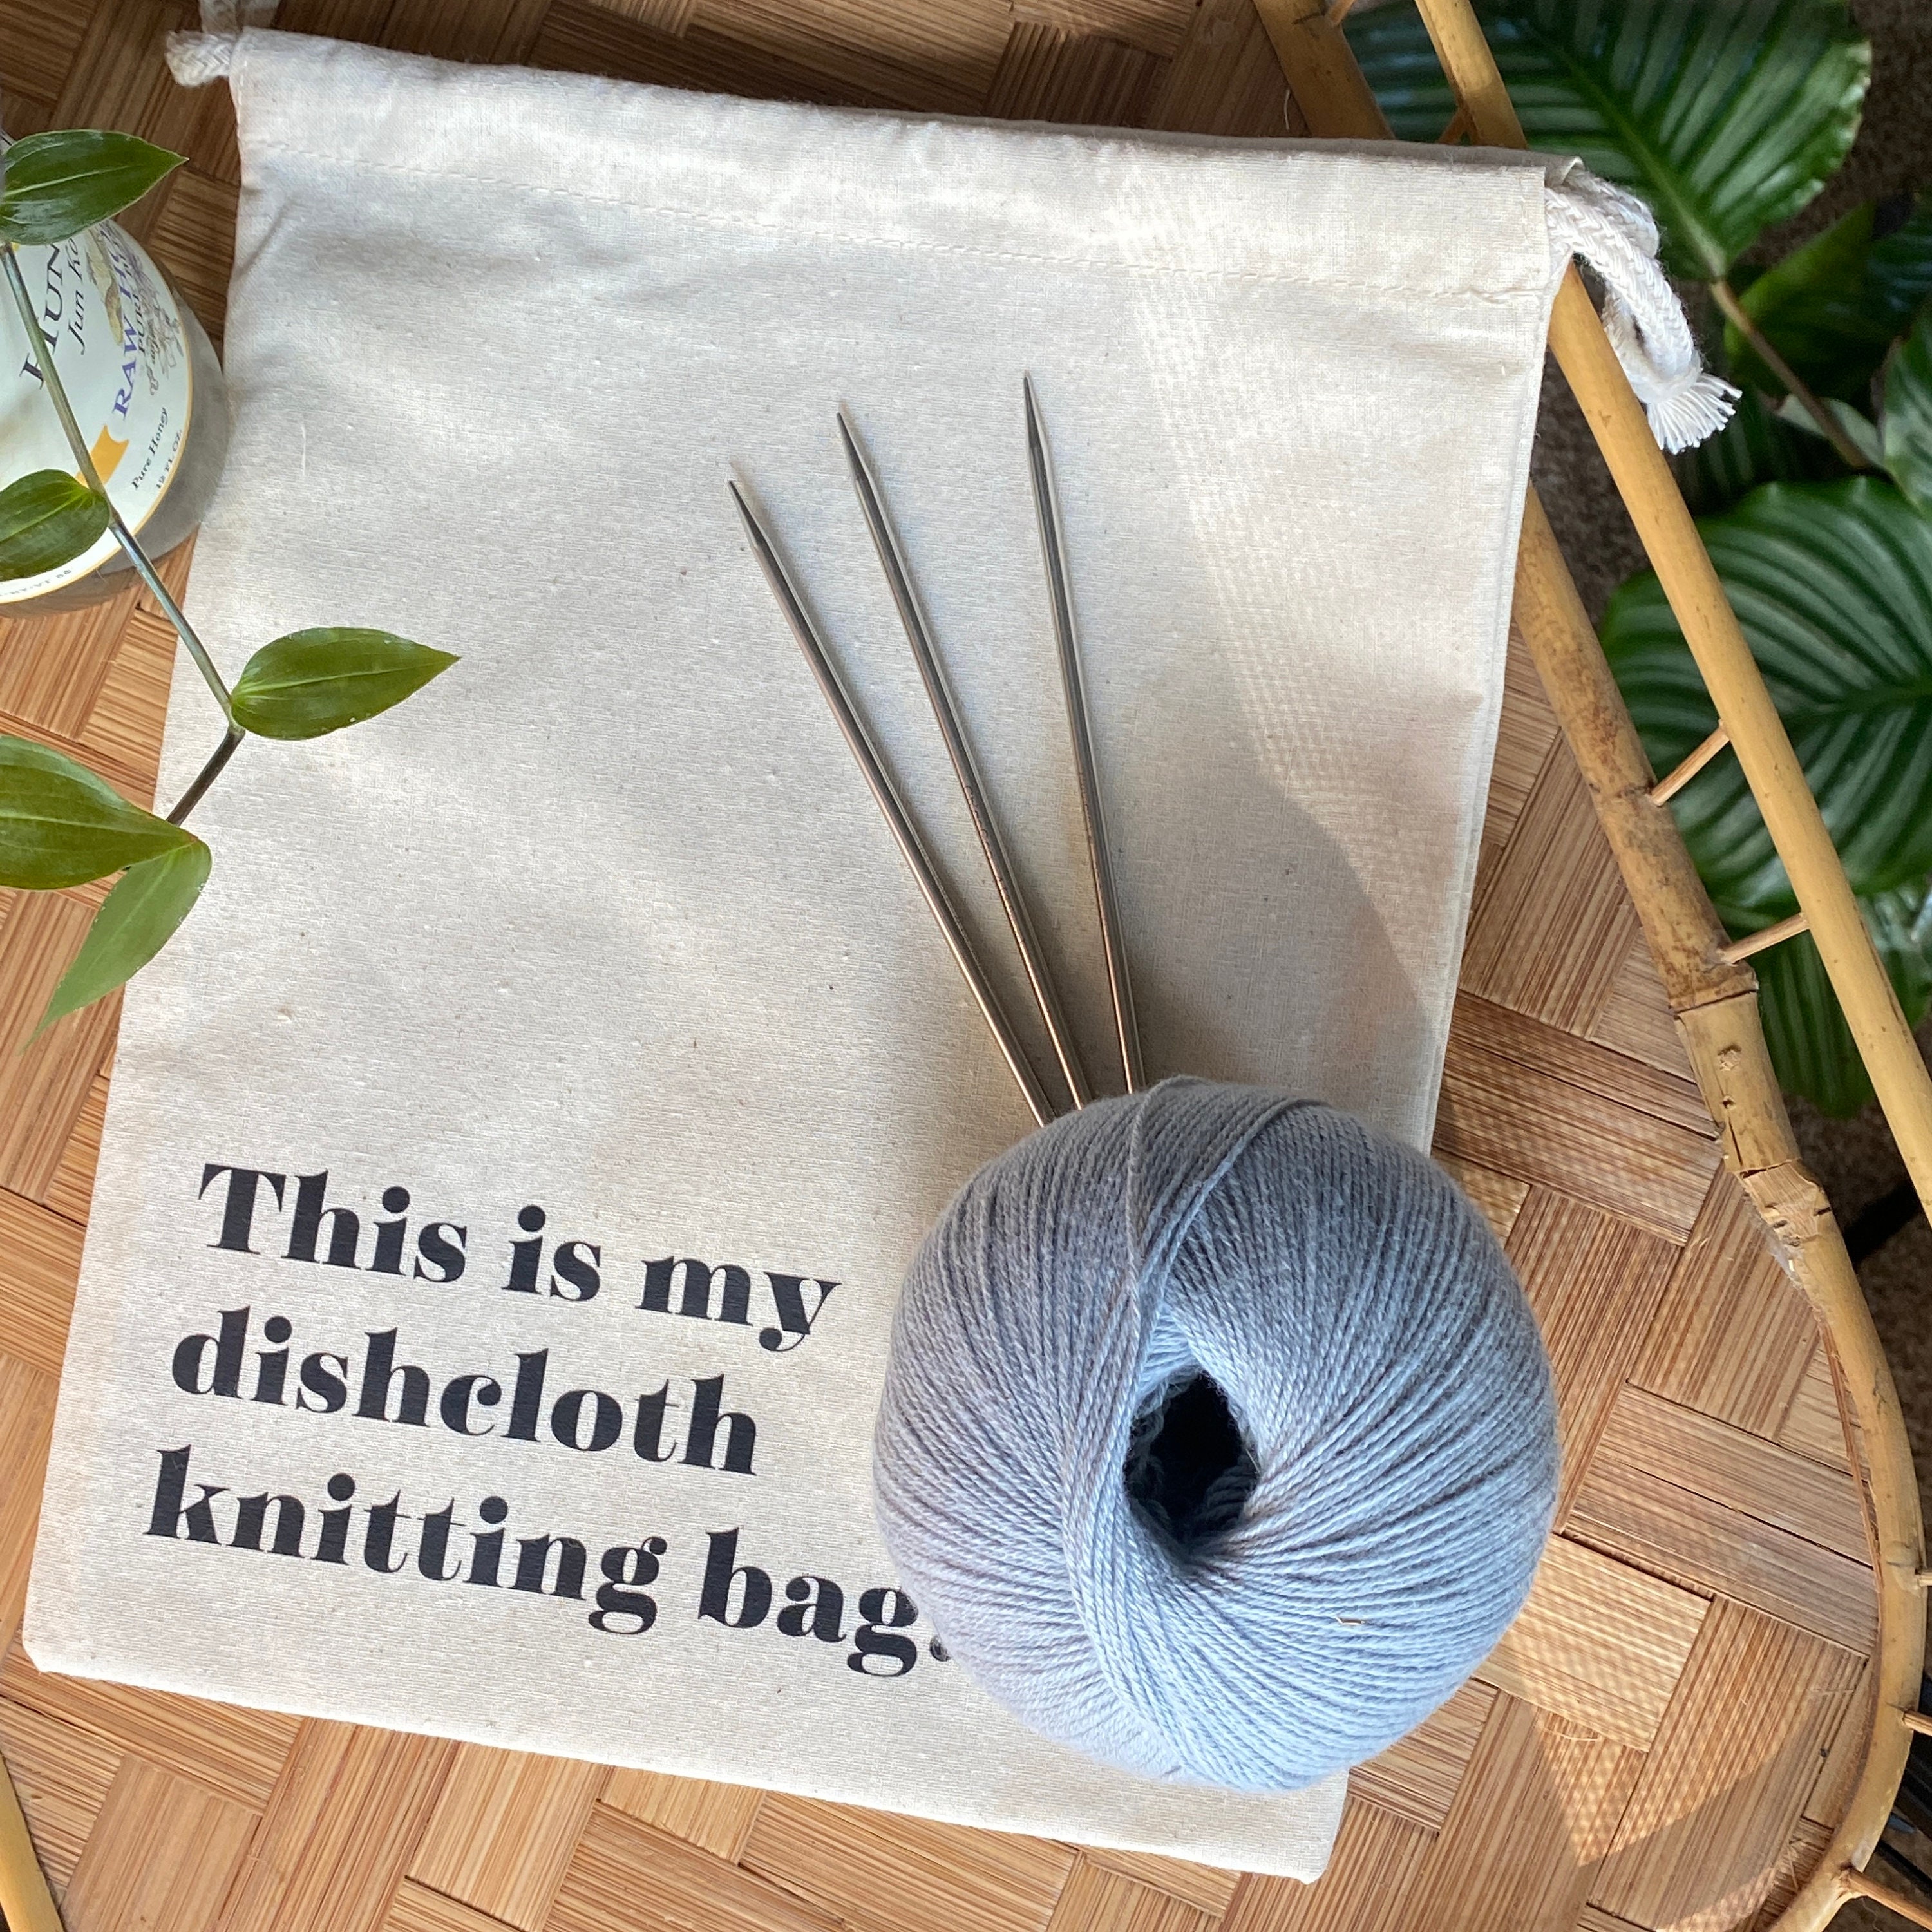 Small drawstring project bag by BK Needleworks at The Endless Skein